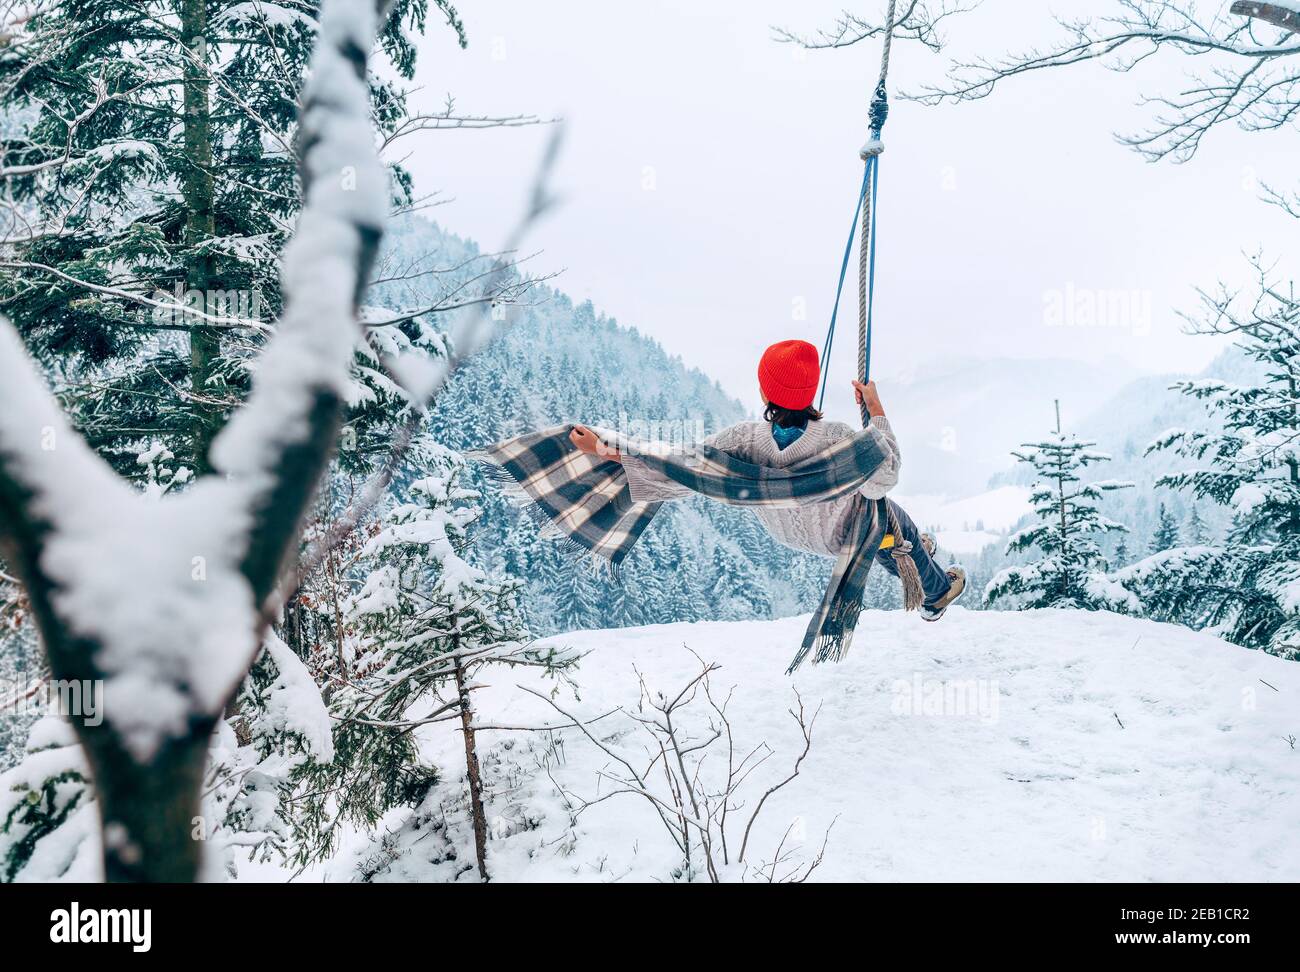 A young woman in warm clothes and Red Cap swinging on a swing between forest trees with picturesque snowy mountain view. Wintertime vacation concept i Stock Photo